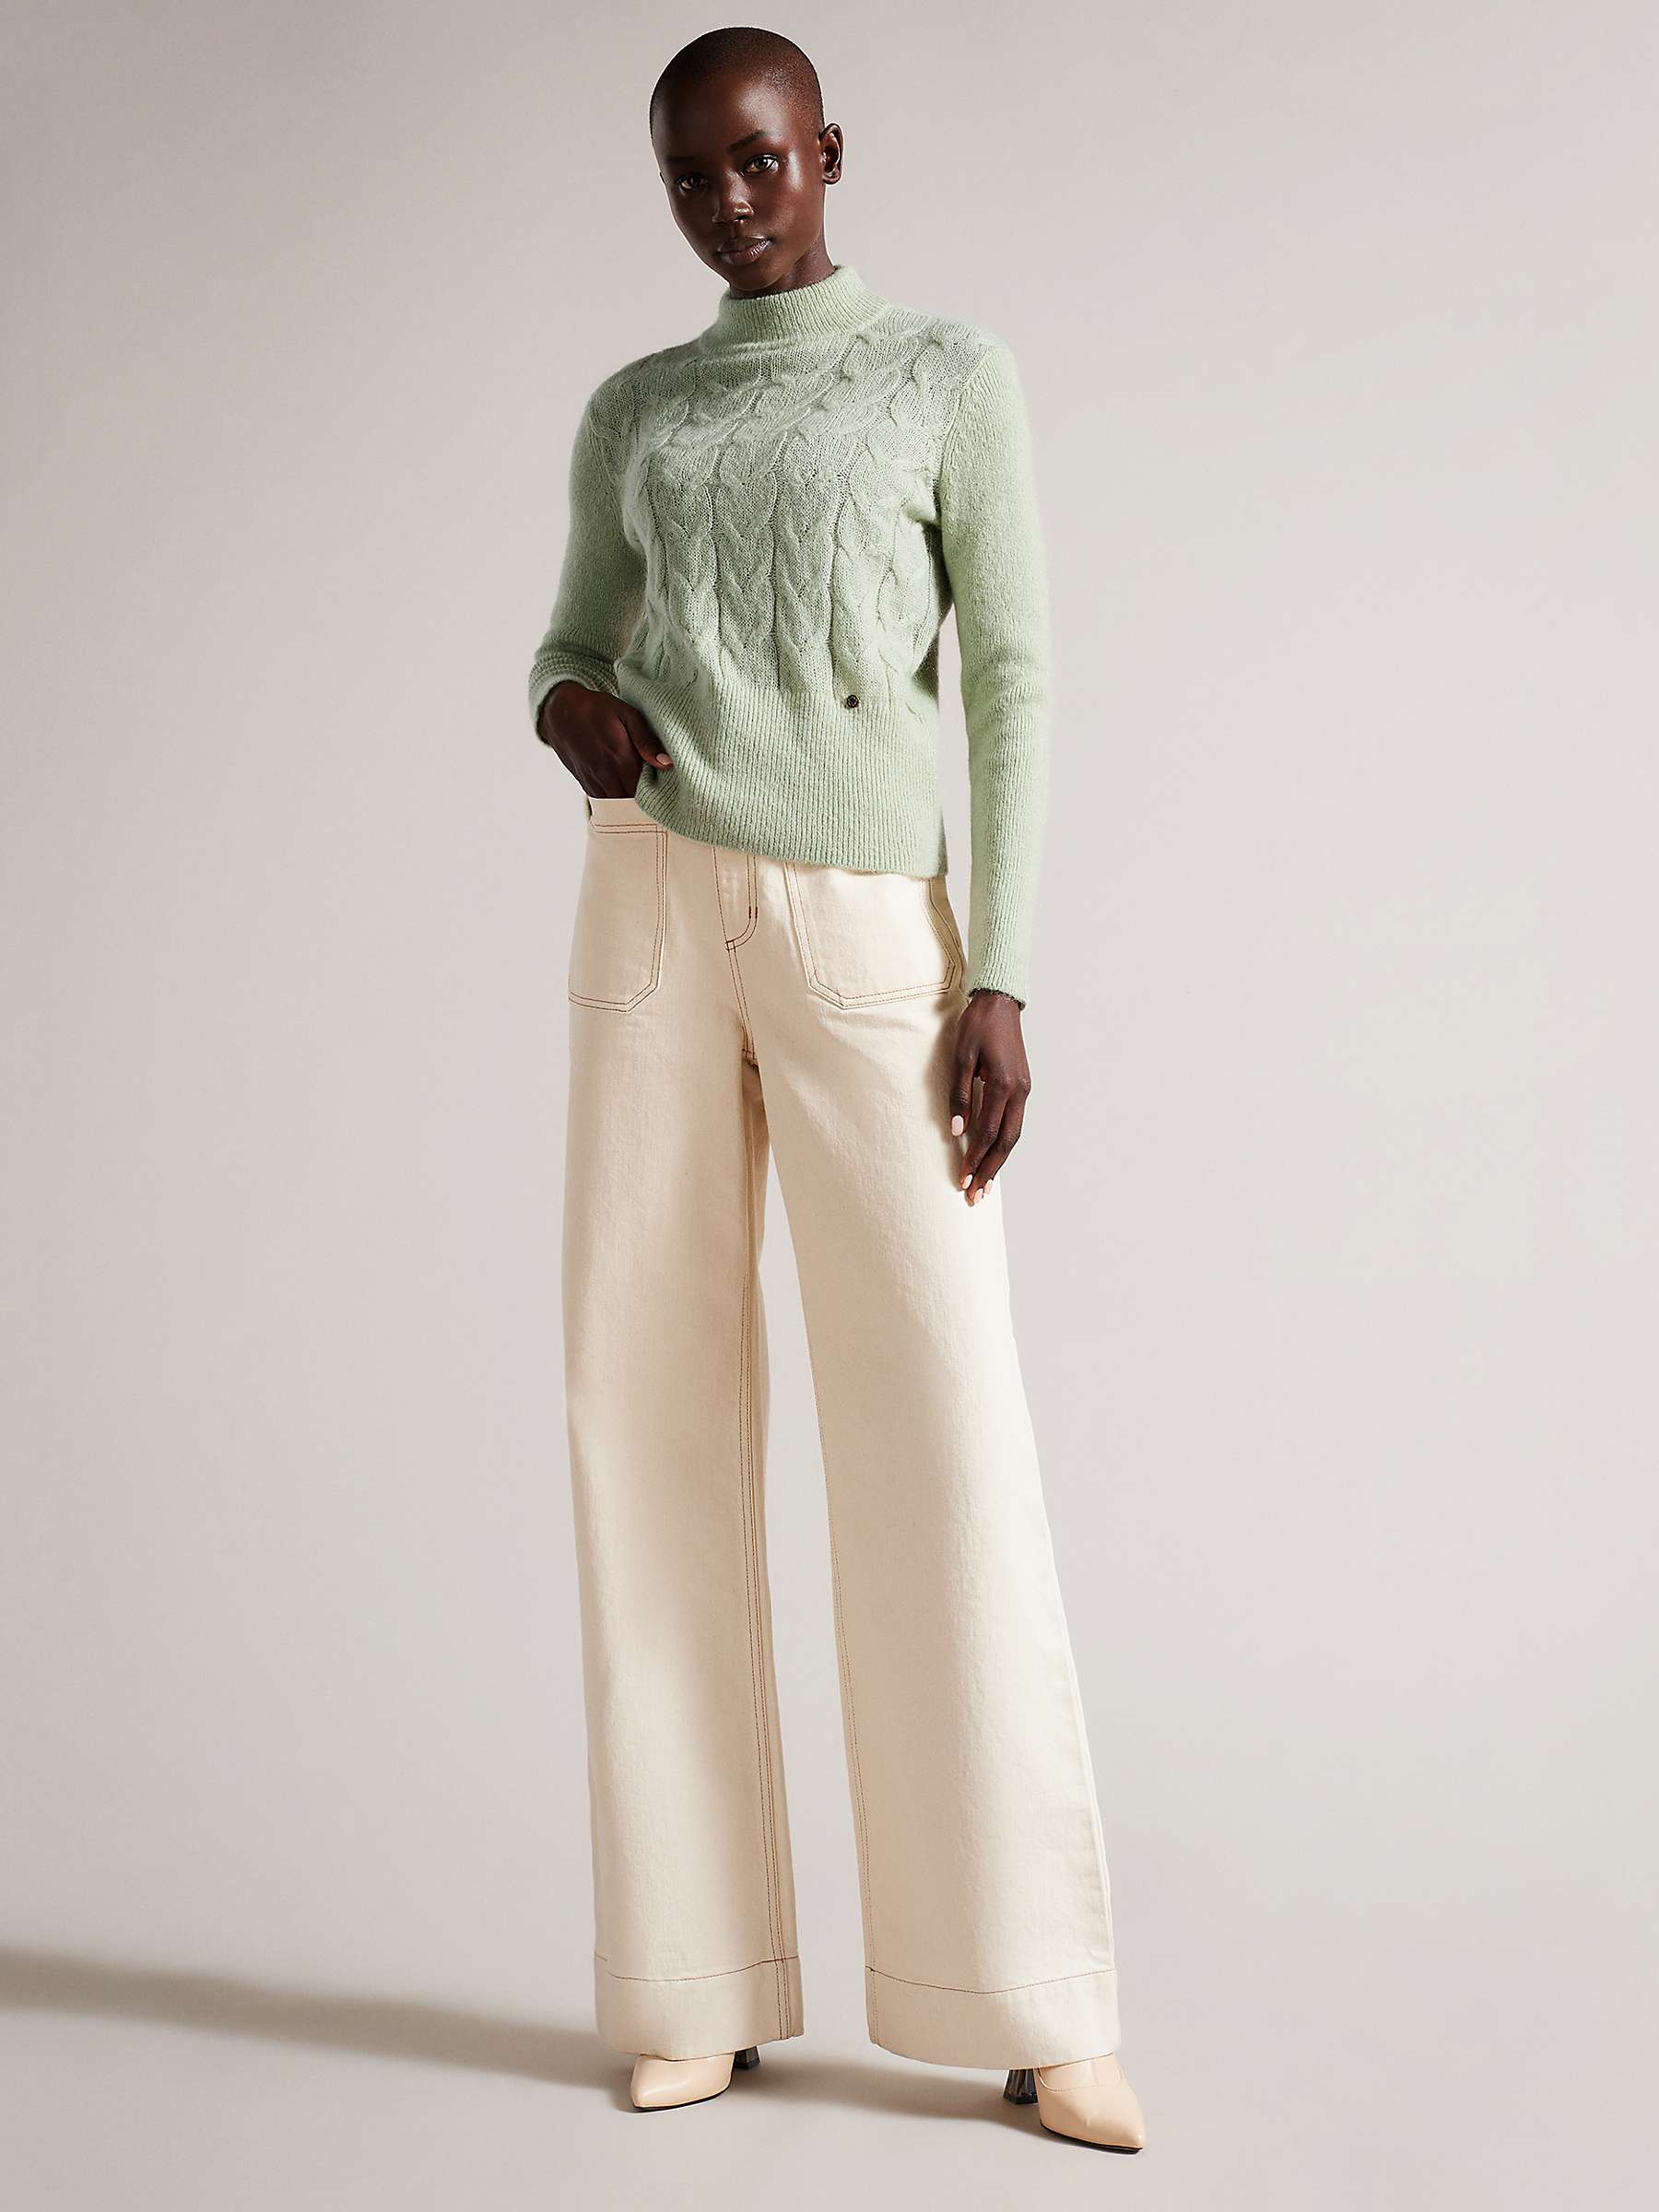 Buy Ted Baker Veolaa Mohair Wool Blend Cable Knit Jumper, Light Green Online at johnlewis.com